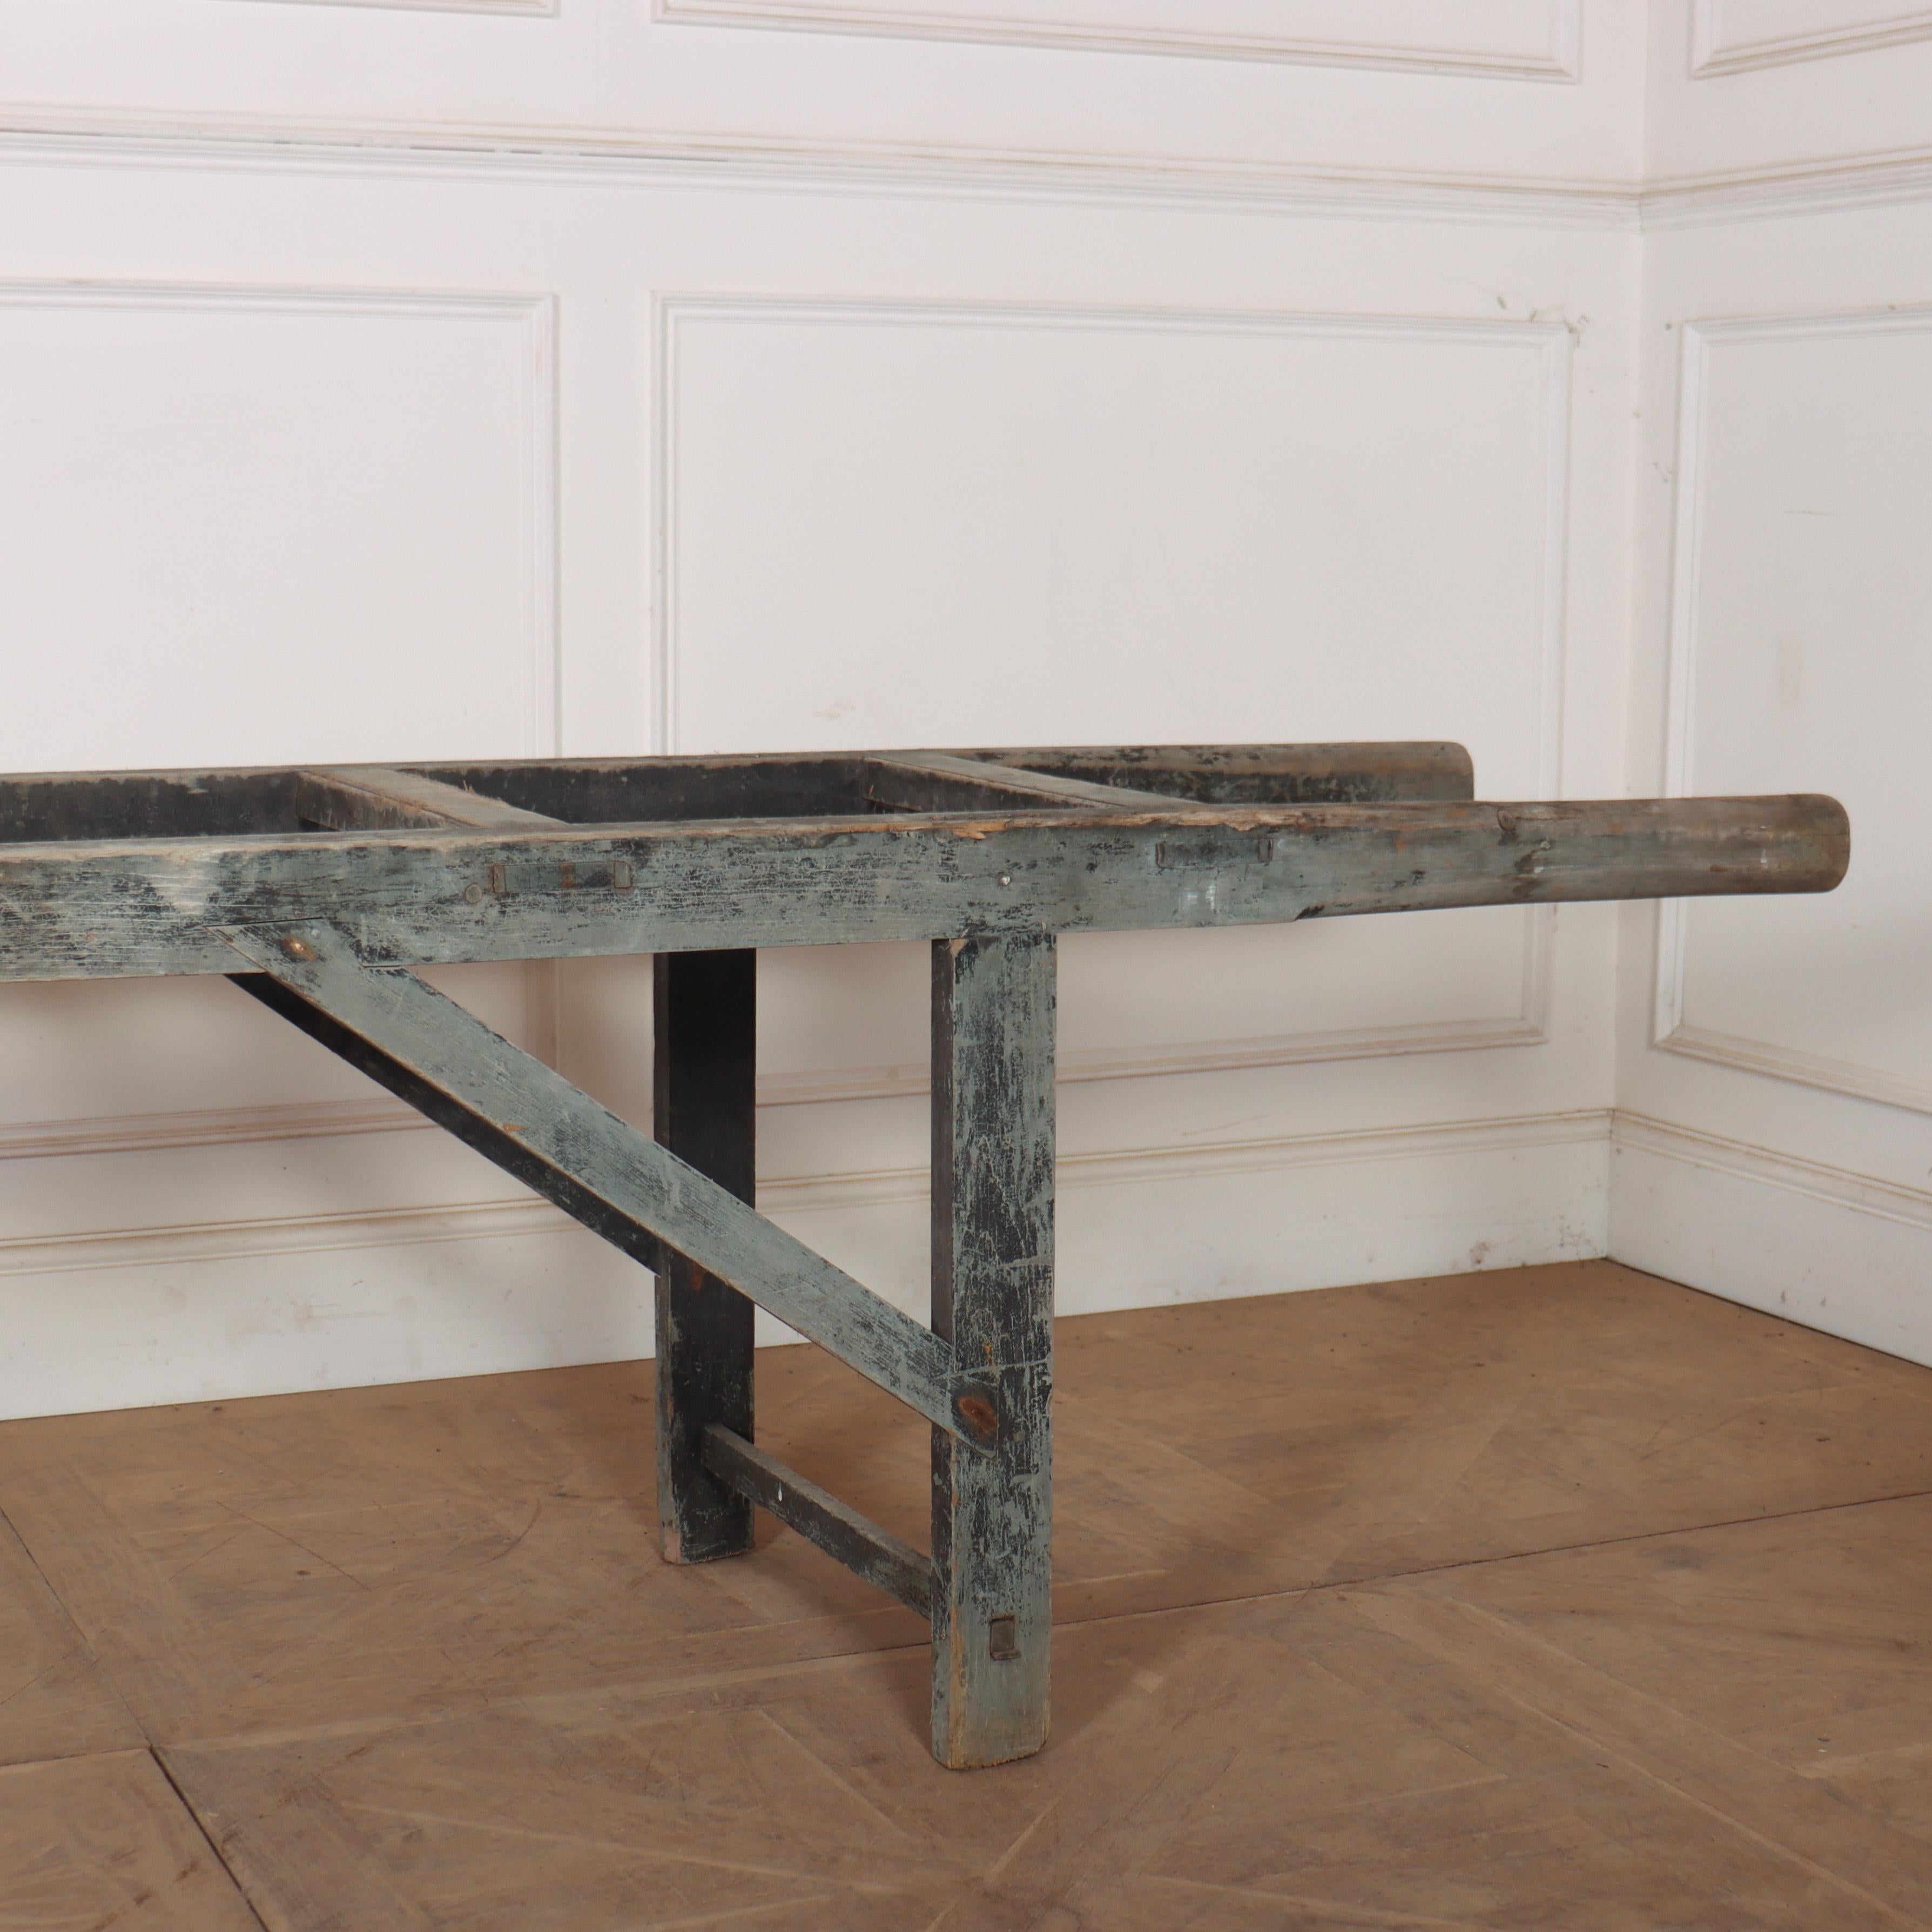 Interesting 19th C English original painted pine porters stand. Would make a great server with a glass top. 1890.

Reference: 8221

Dimensions
113.5 inches (288 cms) Wide
21.5 inches (55 cms) Deep
25.5 inches (65 cms) High